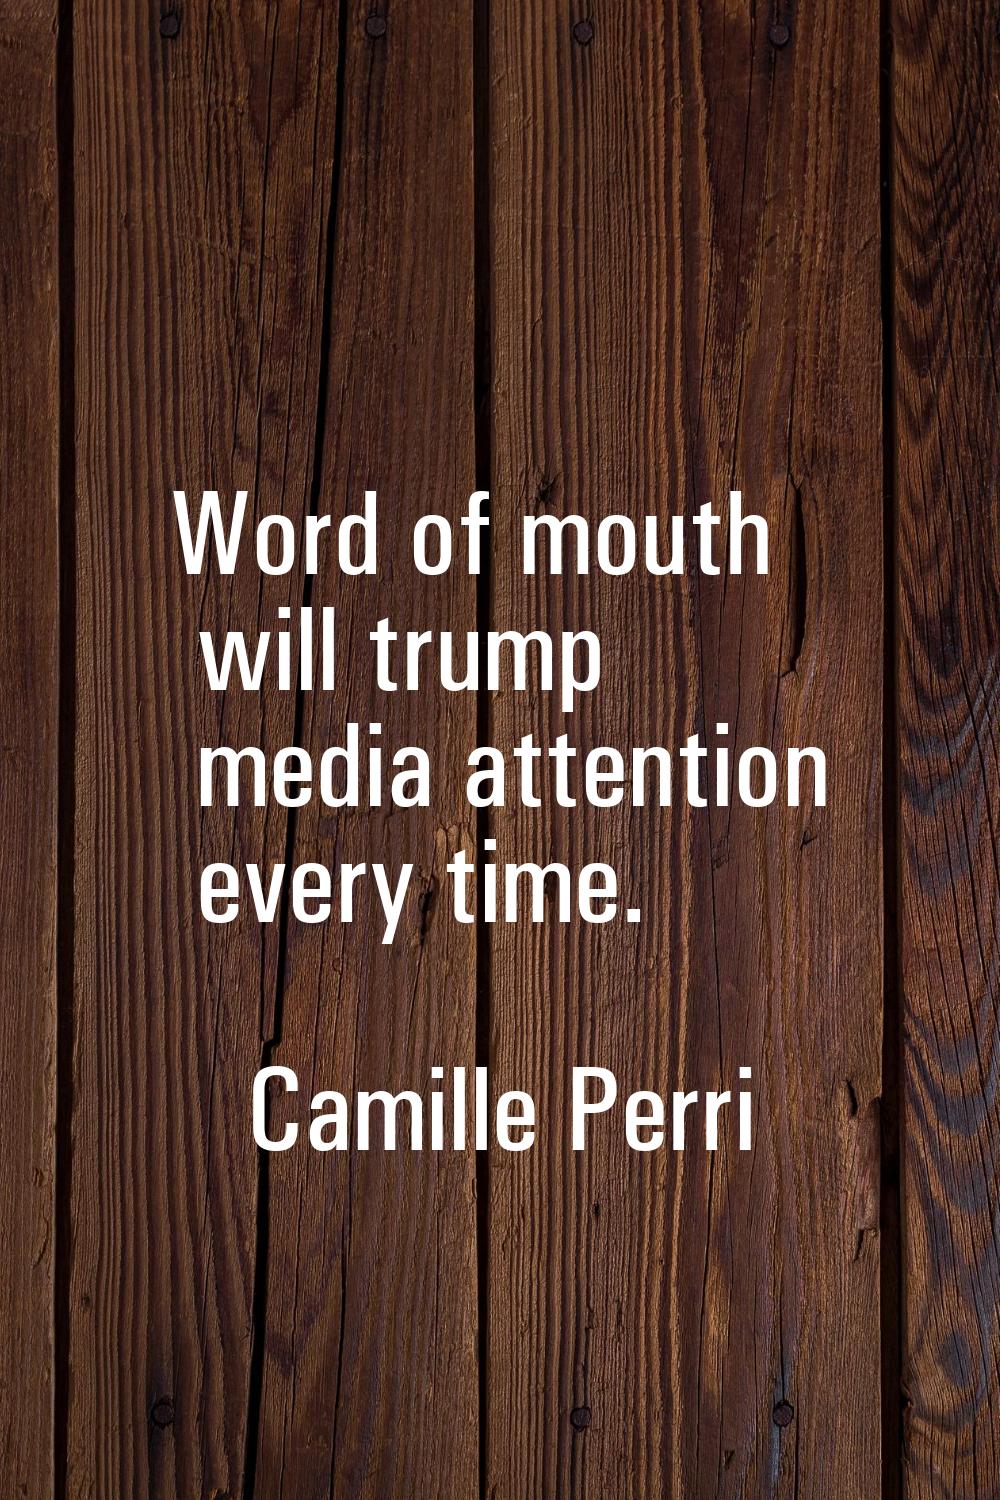 Word of mouth will trump media attention every time.